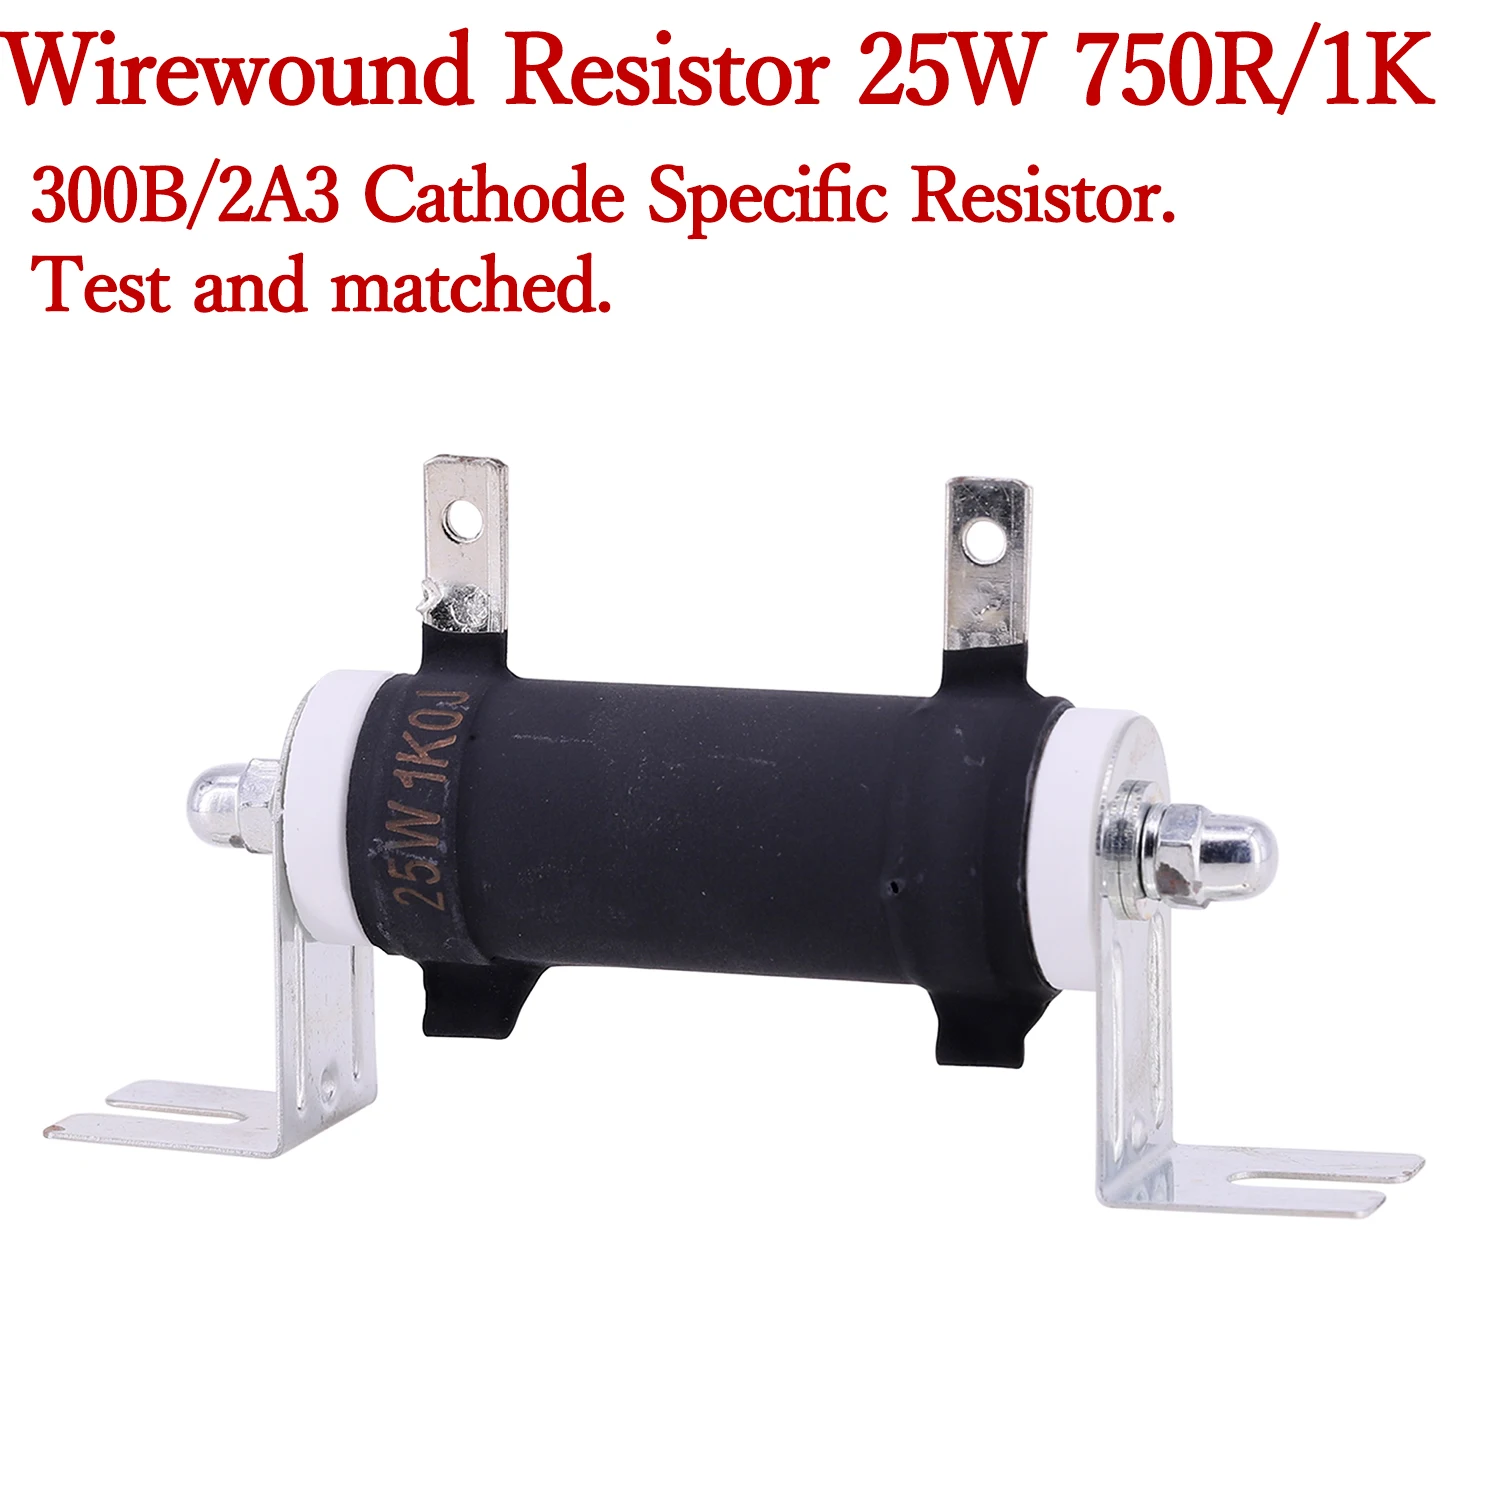 1PC 25W 750R 1K Wirewound Resistor 2A3 300B Cathode Specific Resistor  Testing And Matching hydrometer testing electrolyte level density acid specific drop shipping